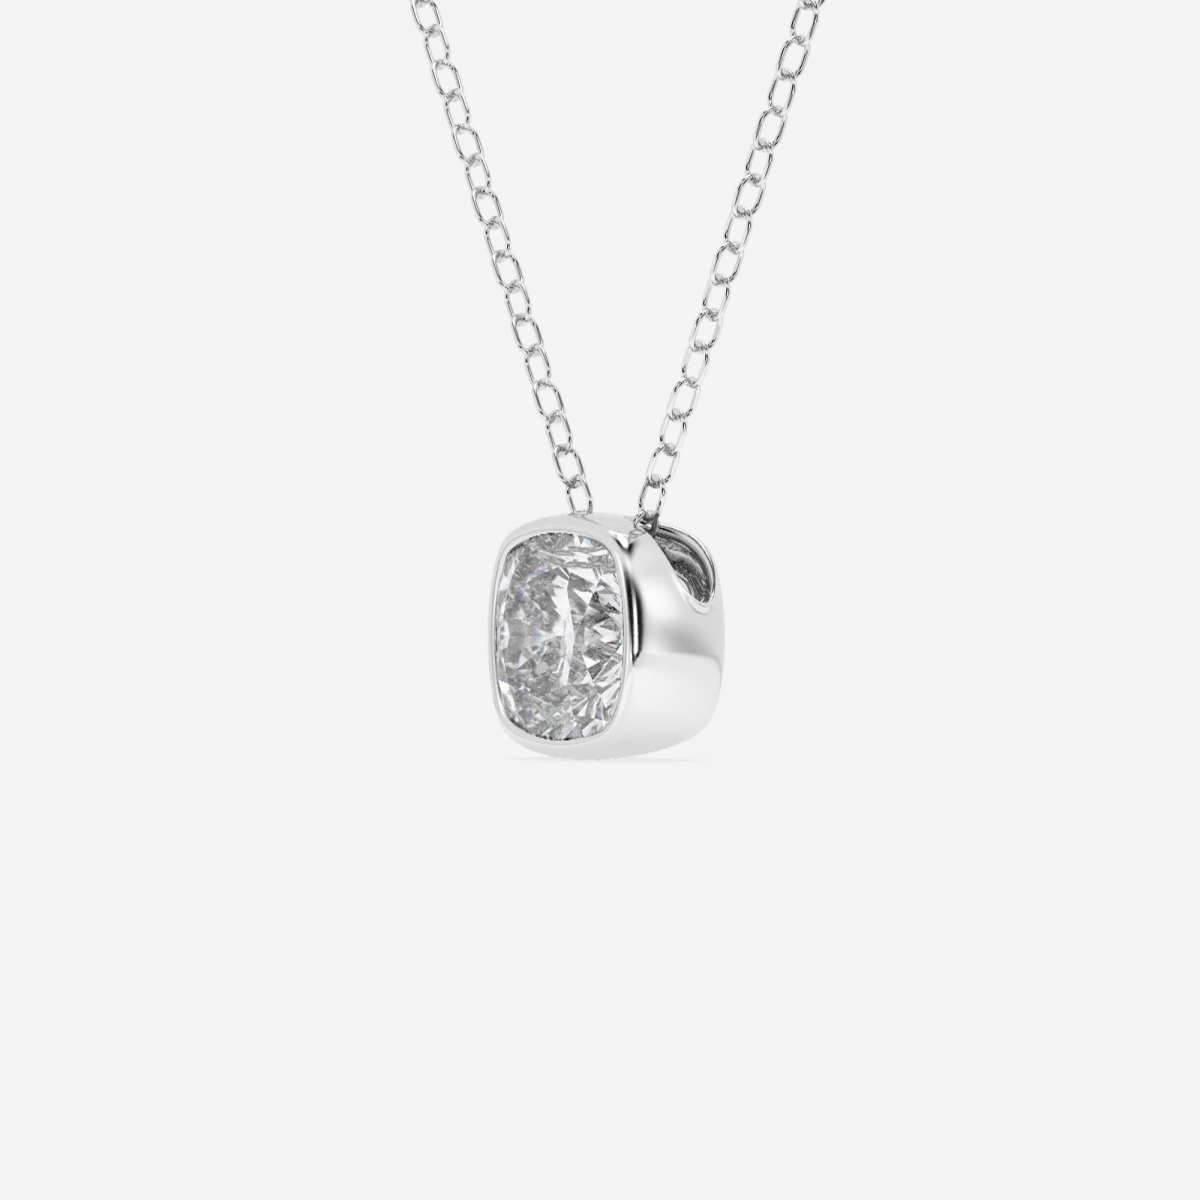 Additional Image 1 for  1 ctw Cushion Lab Grown Diamond Bezel Set Solitaire Pendant with Adjustable Chain